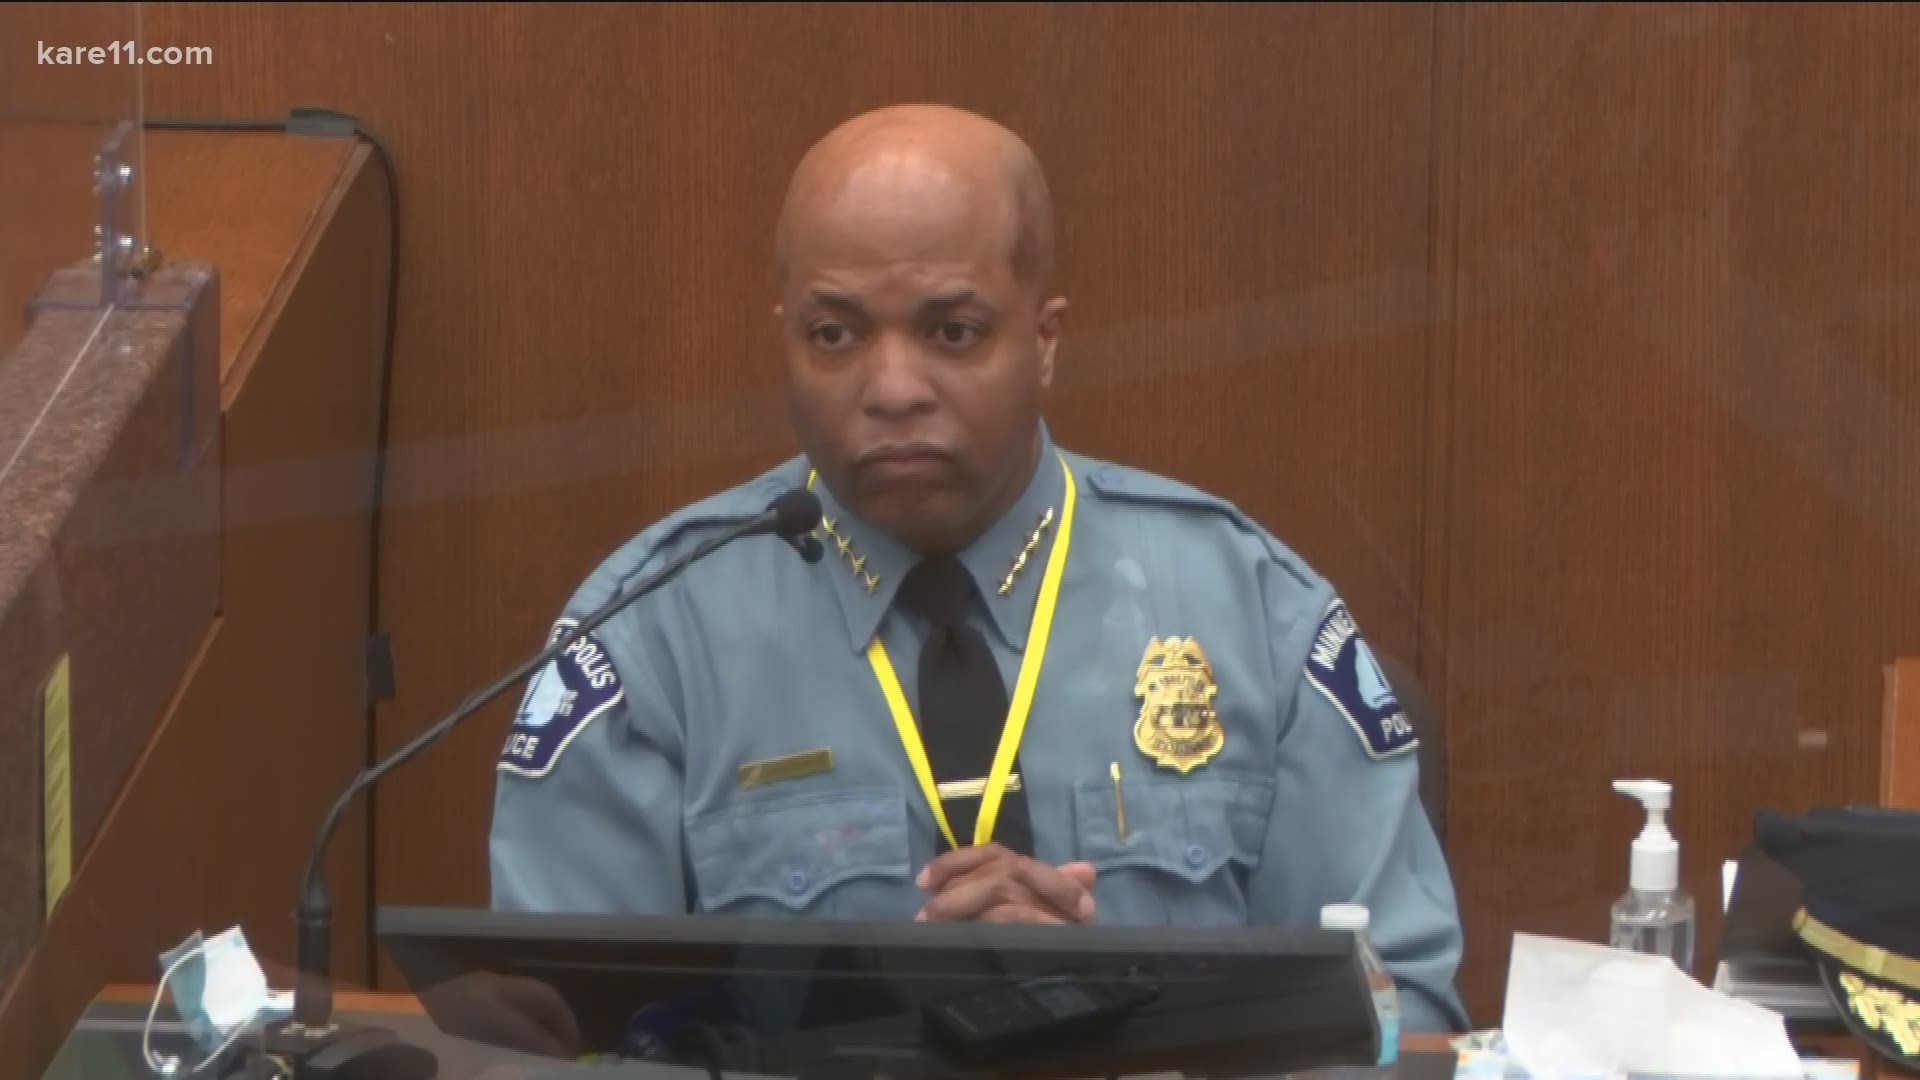 Medaria Arradondo, Minneapolis' police chief, testified that former officer Derek Chauvin's actions weren't in line with de-escalation and use-of-force policies.